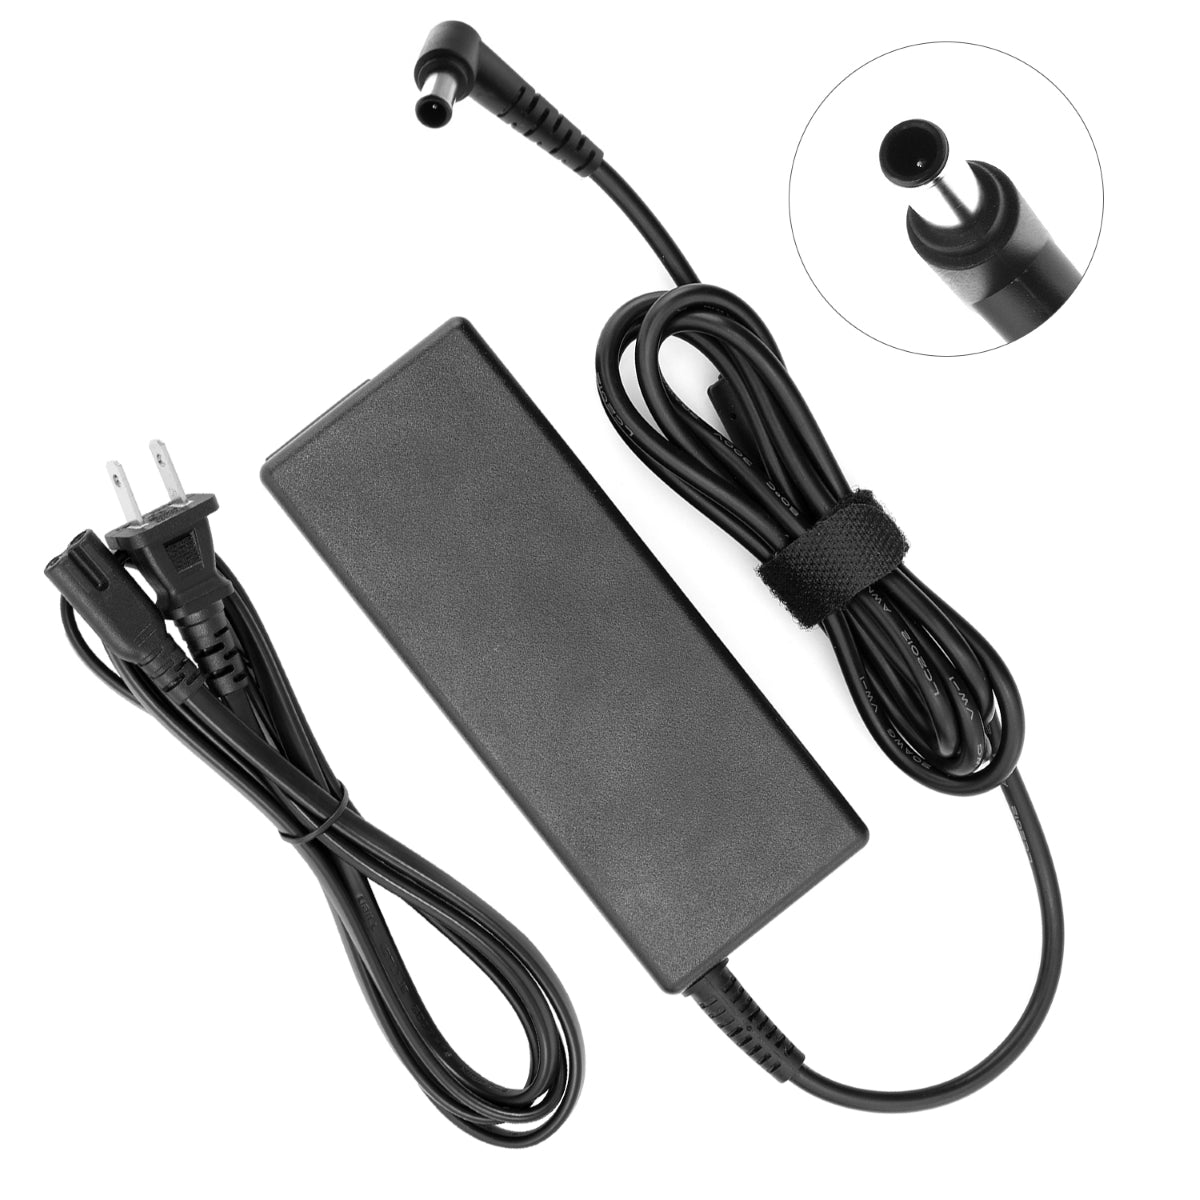 AC Adapter for LG 23EA53V-P Monitor